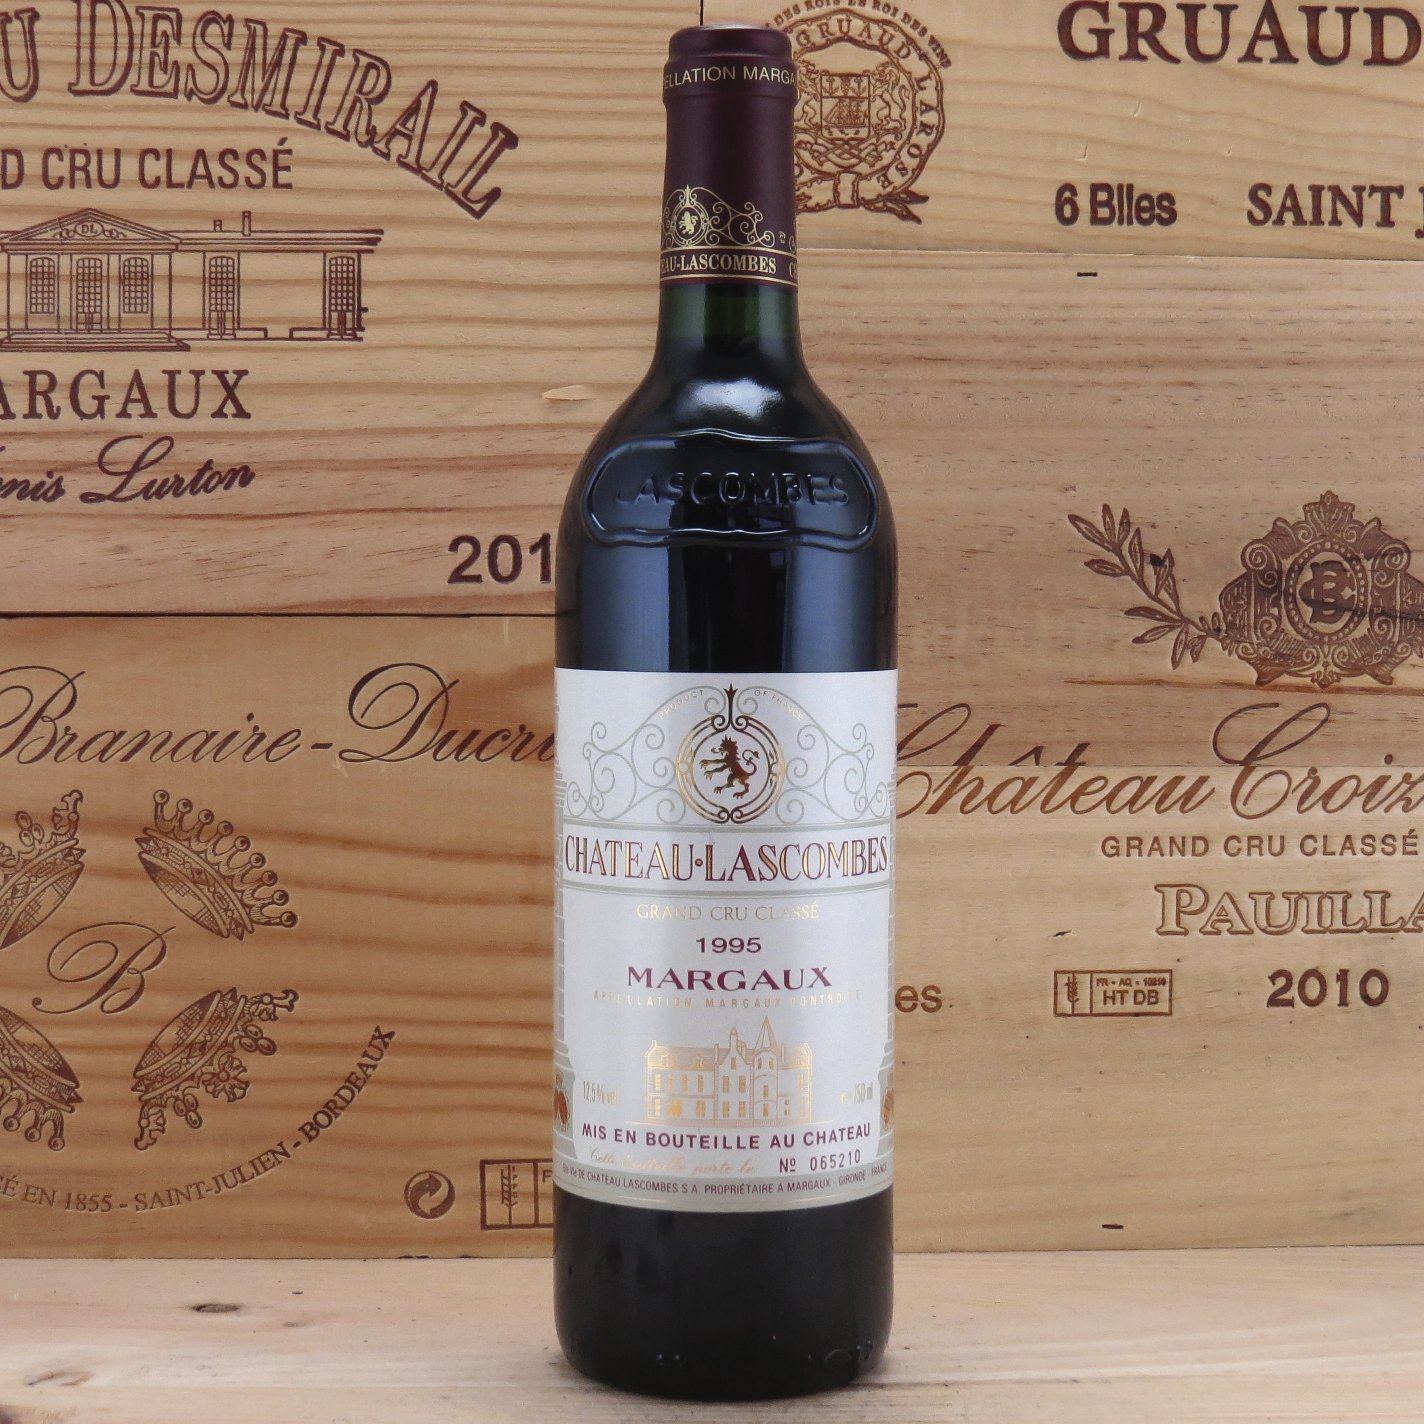 1995 Chateau Lascombes